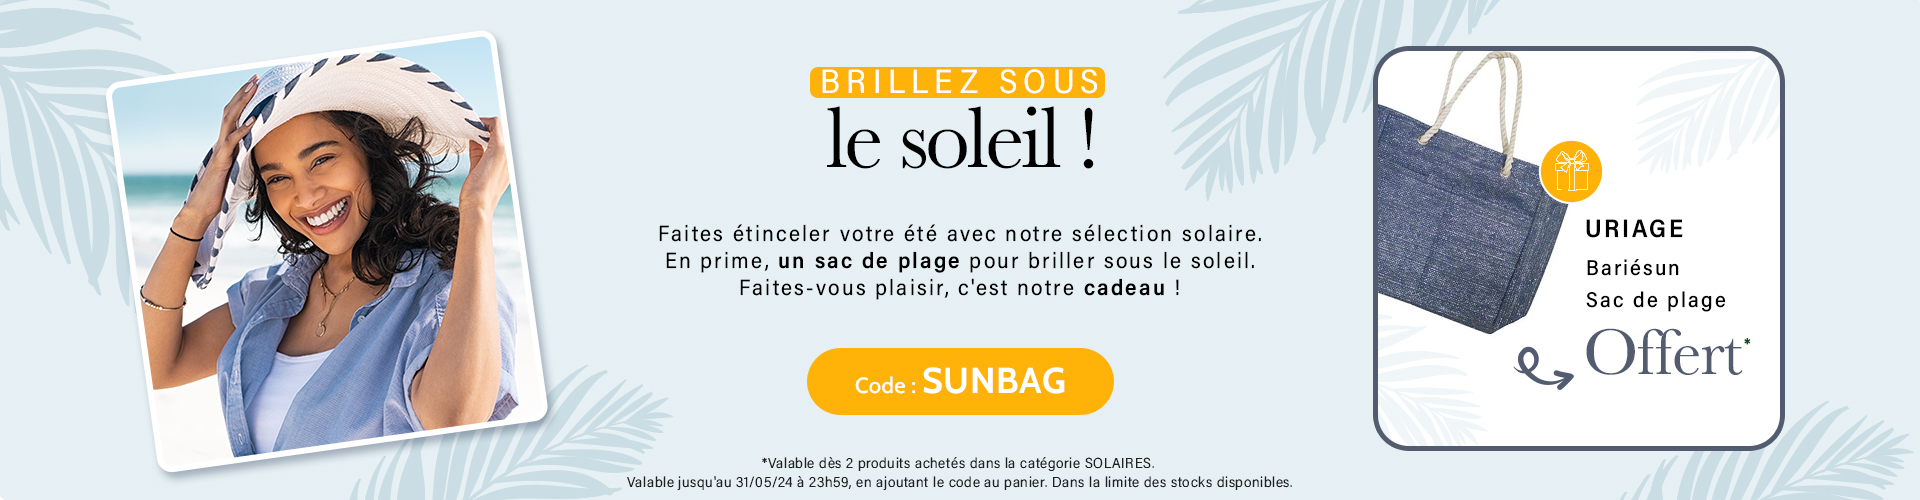 Action Solaire 